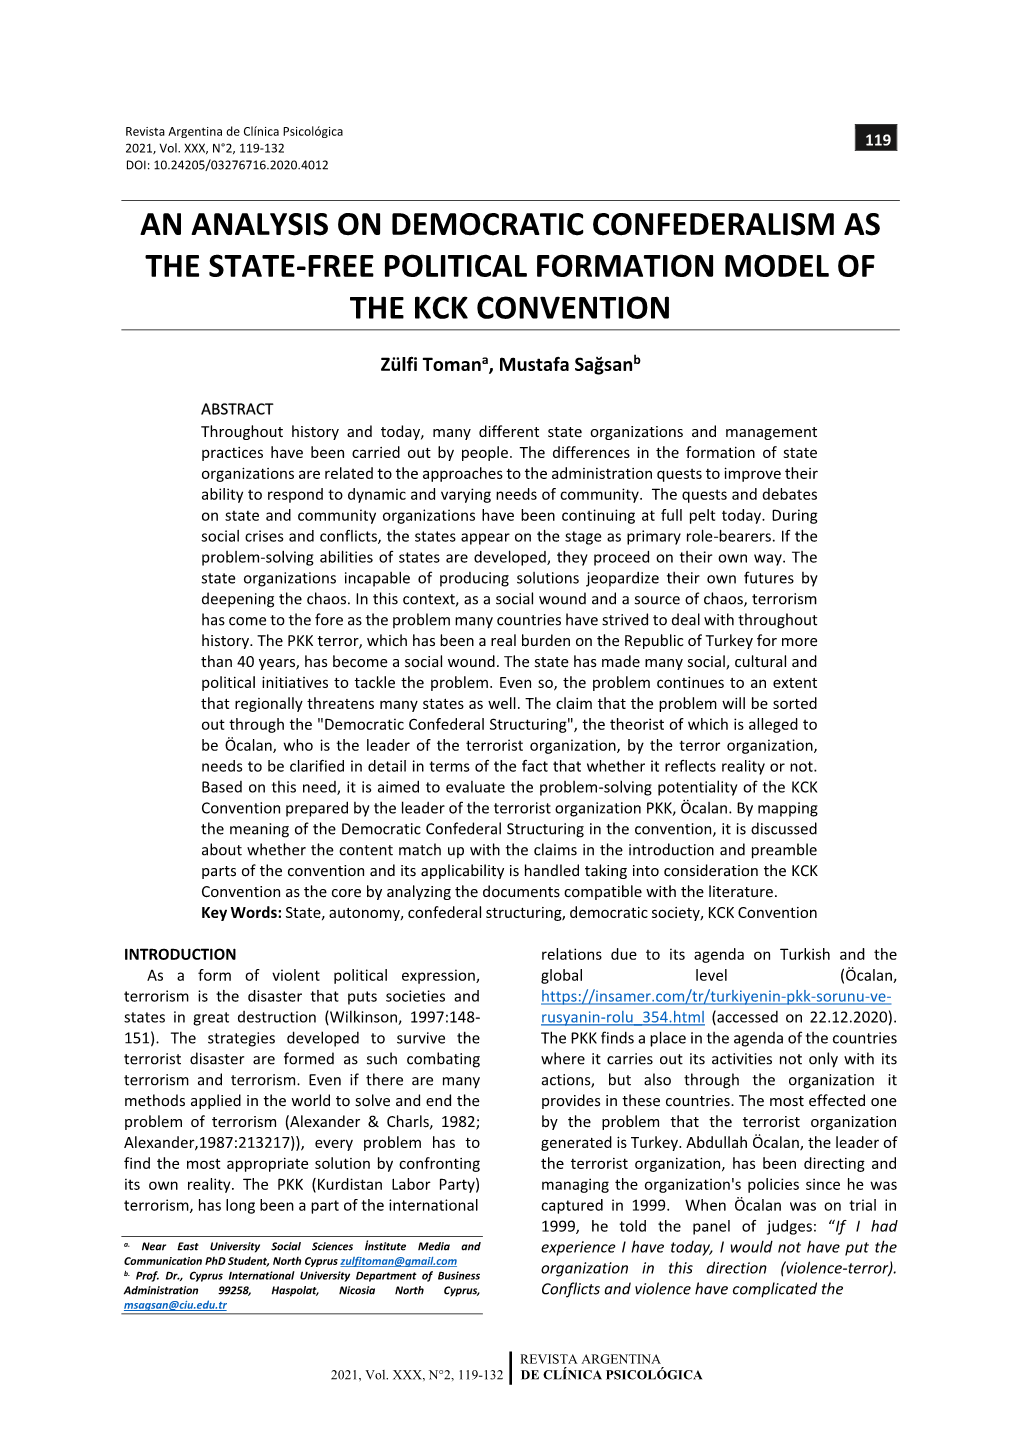 An Analysis on Democratic Confederalism As the State-Free Political Formation Model of the Kck Convention